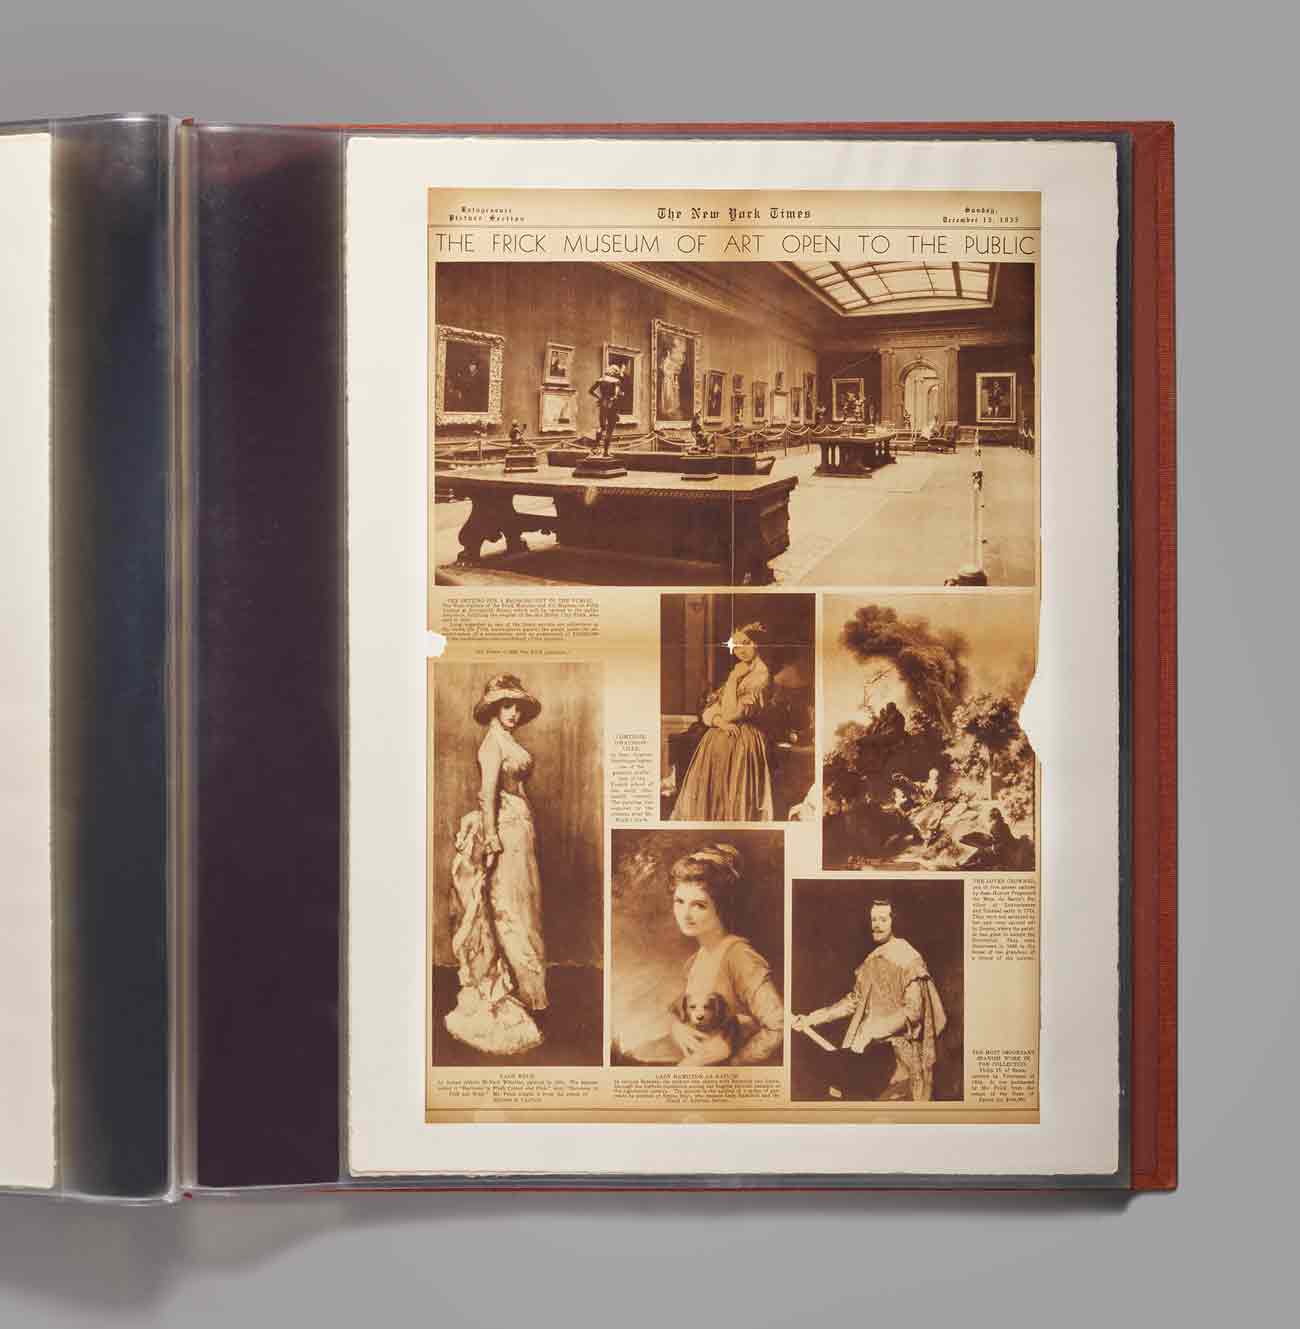 Bound scrapbook with a New York Times clipping announcing the opening of The Frick Collection